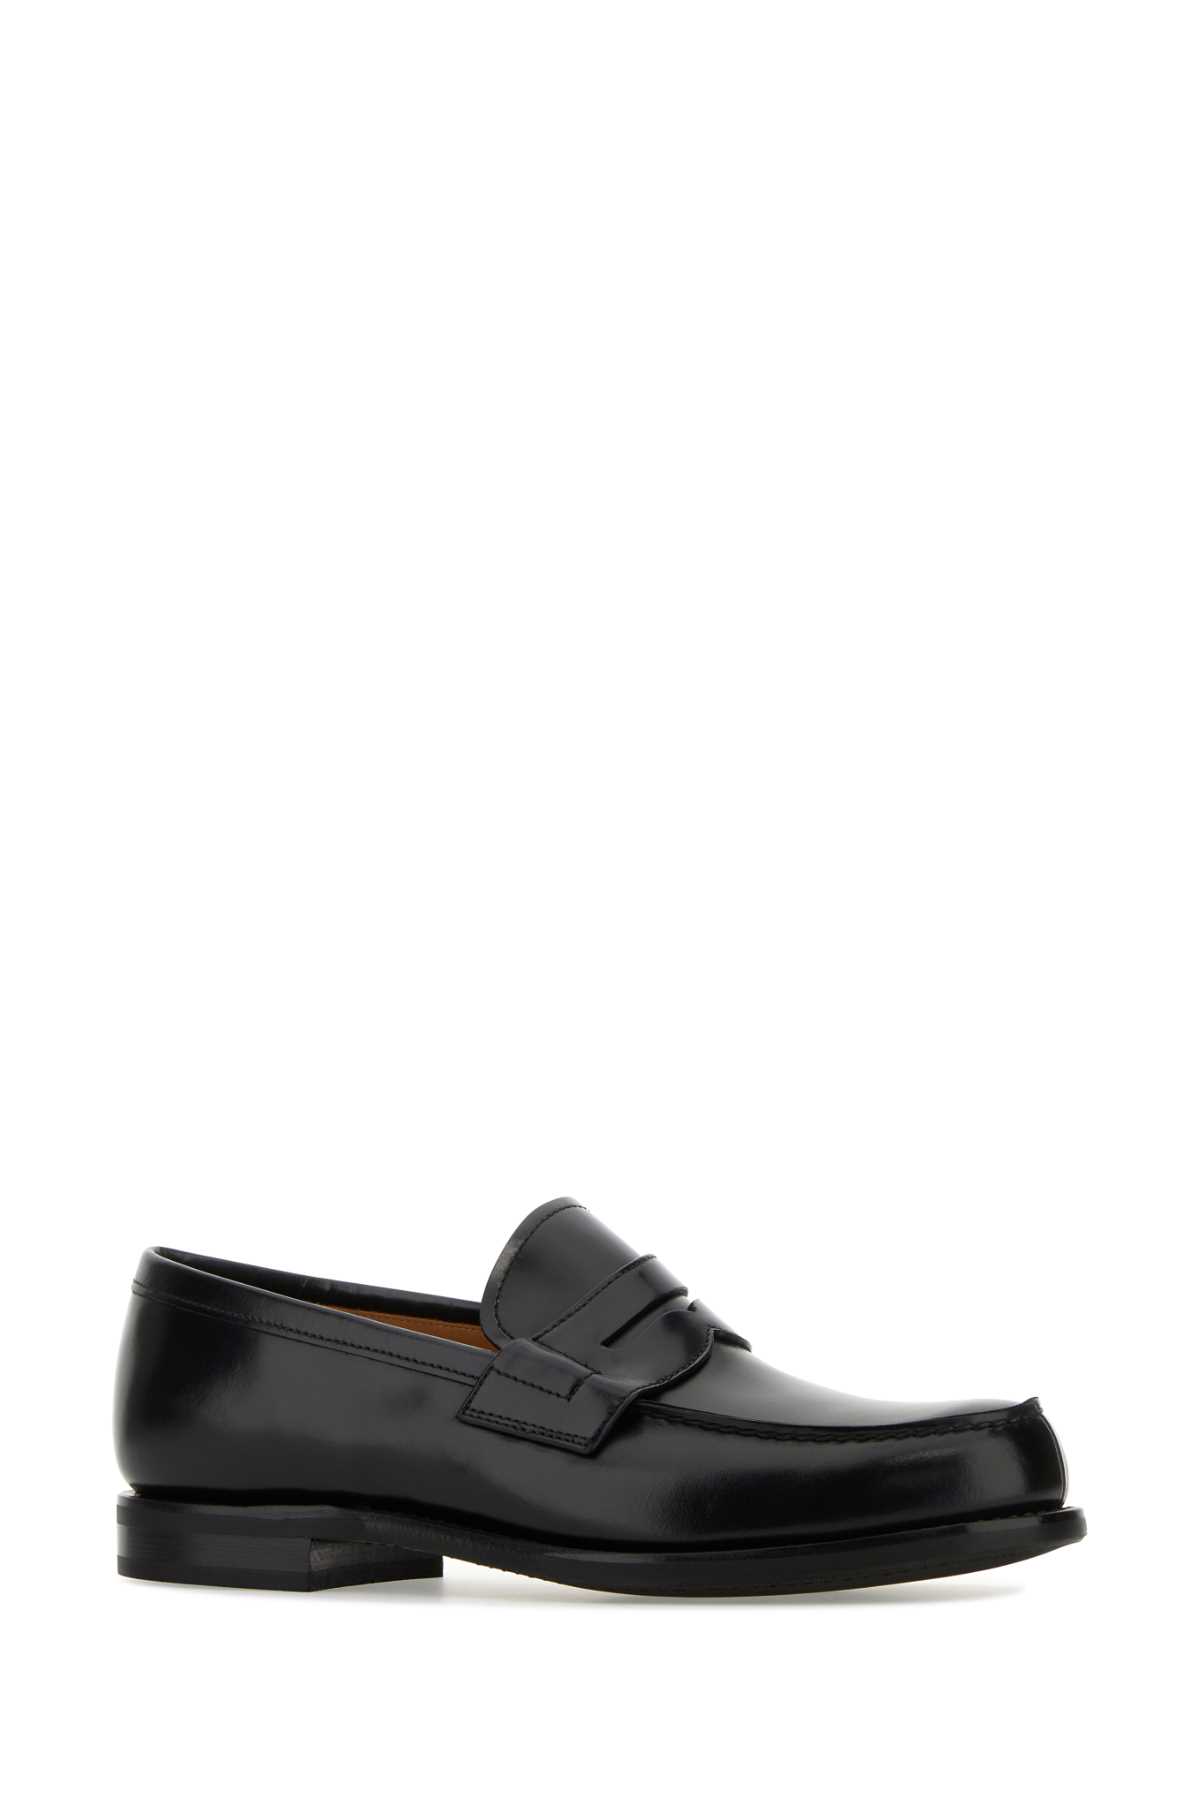 Shop Church's Black Leather Loafers